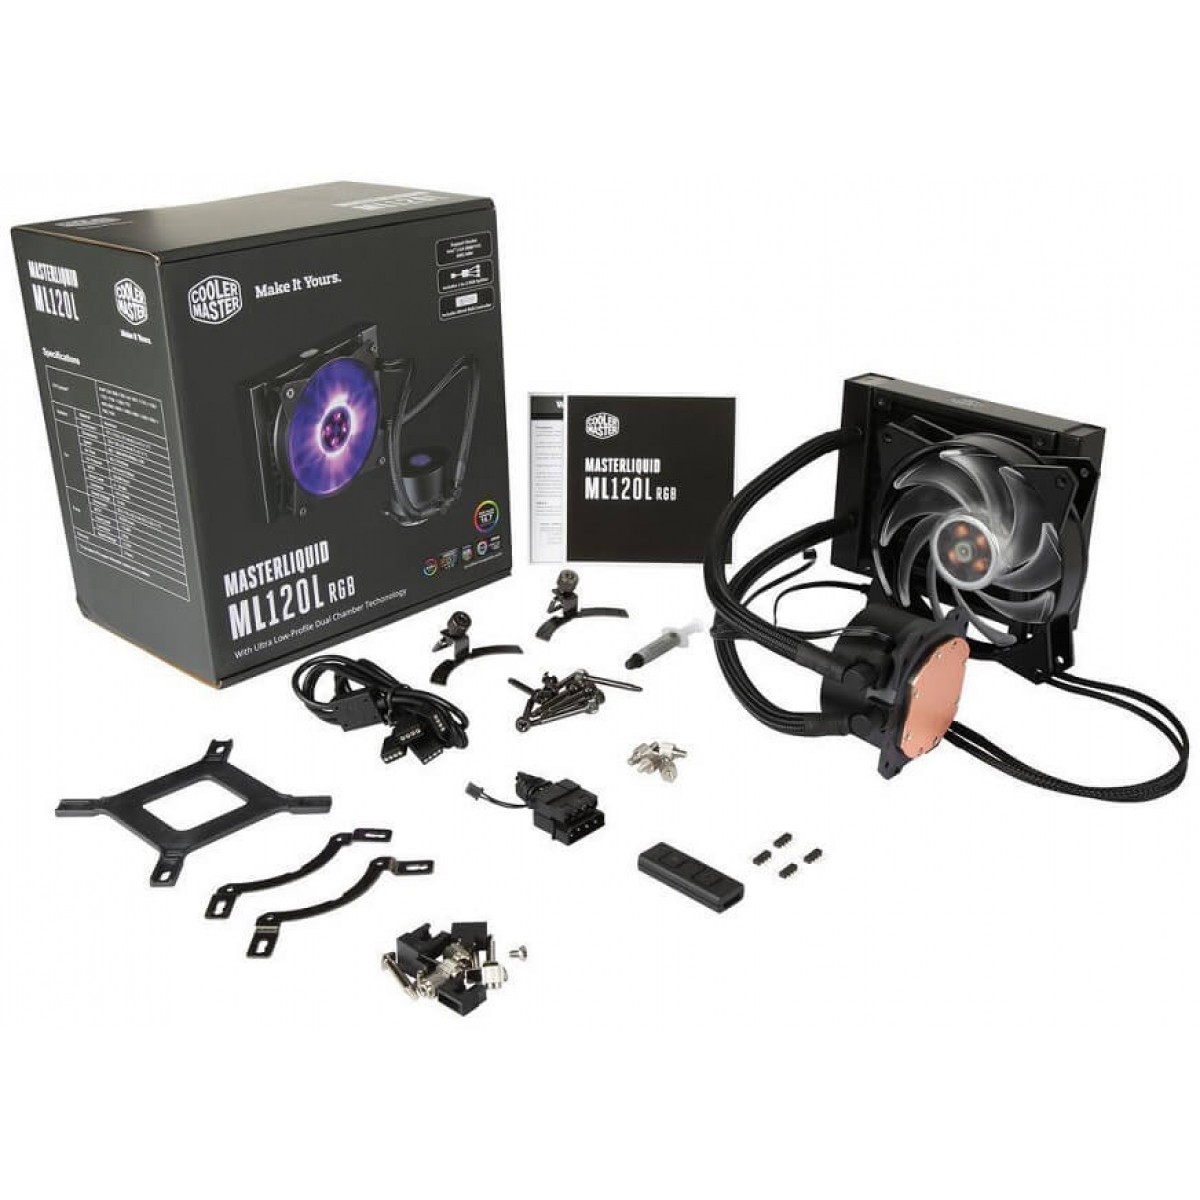 Water Cooler Cooler Master Masterliquid ML120L, RGB 120mm, Intel-AMD, MLW-D12M-A20PC-R1